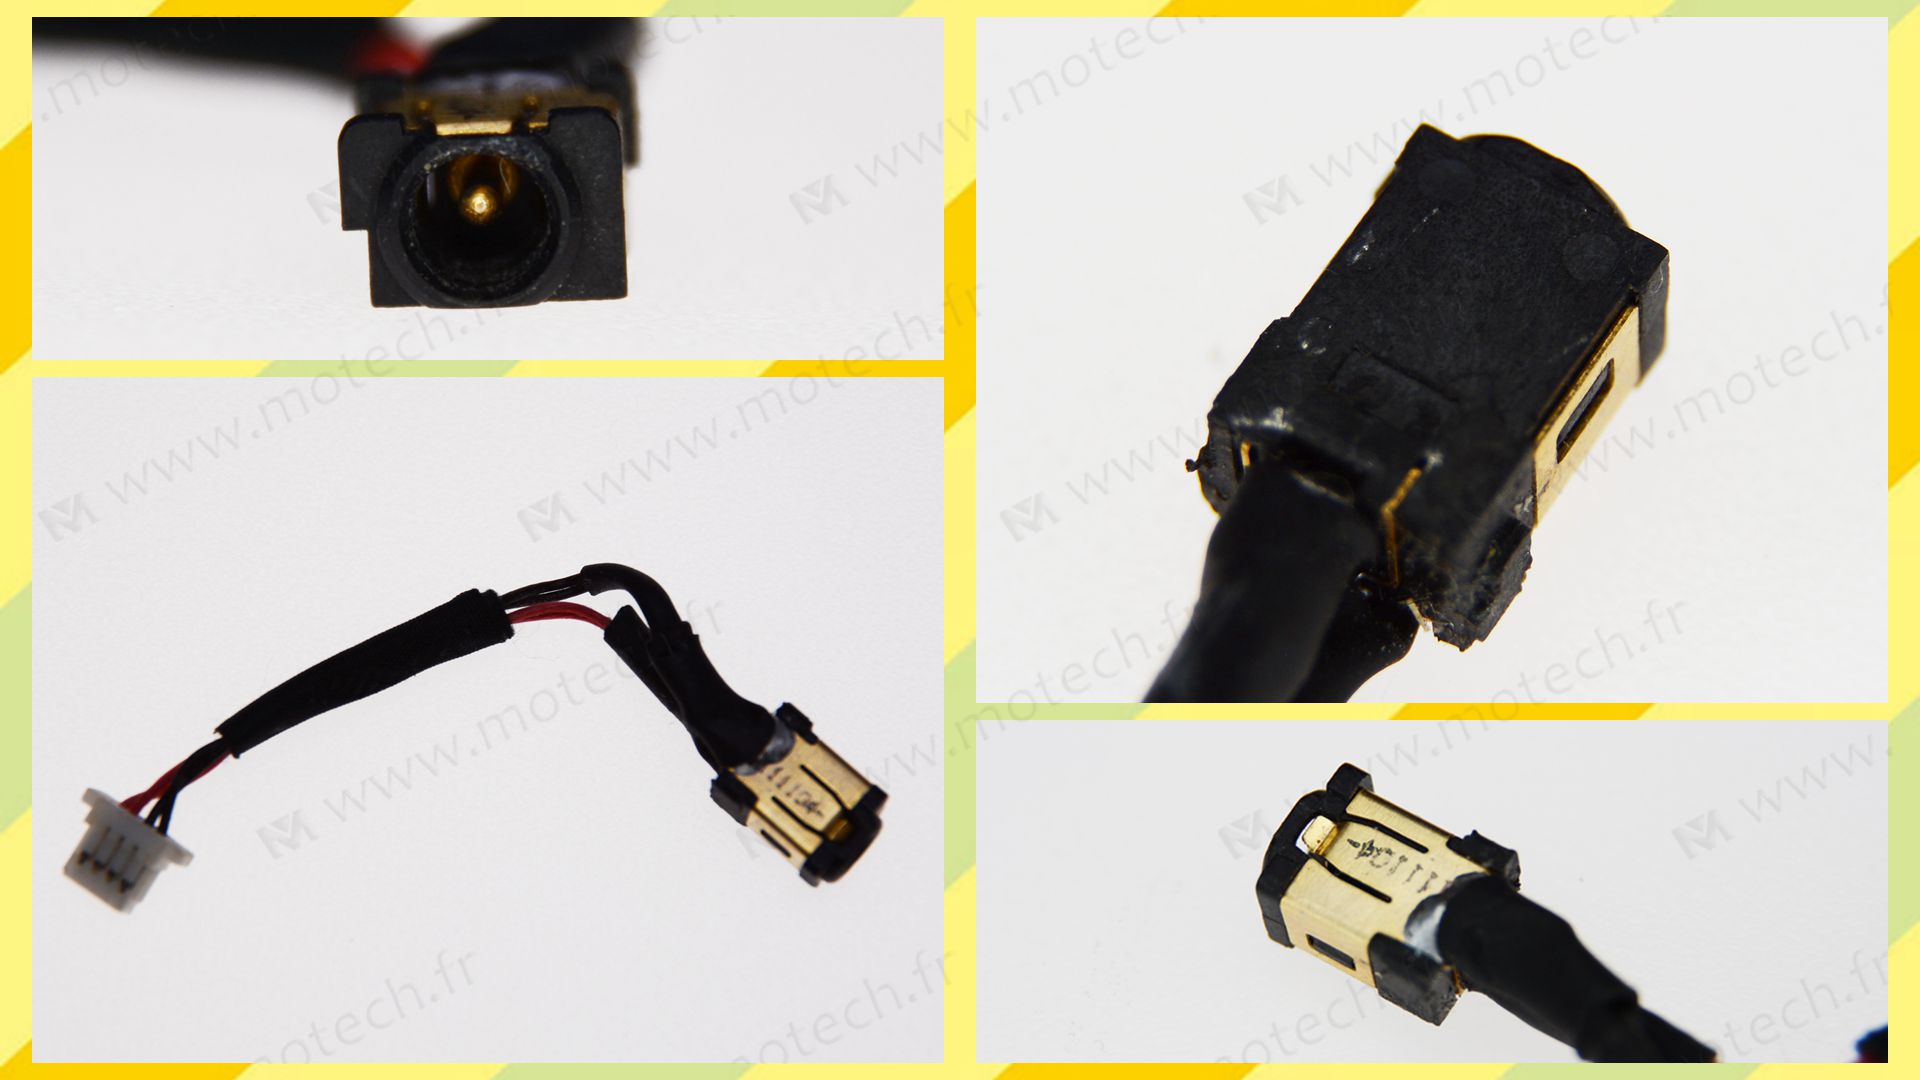 Acer S7-393 charging connector, Acer S7-393 DC Power Jack, Acer S7-393 DC IN Cable, Acer S7-393 Power Jack, Acer S7-393 plug, Acer S7-393 Jack socket, Acer S7-393 connecteur de charge, 